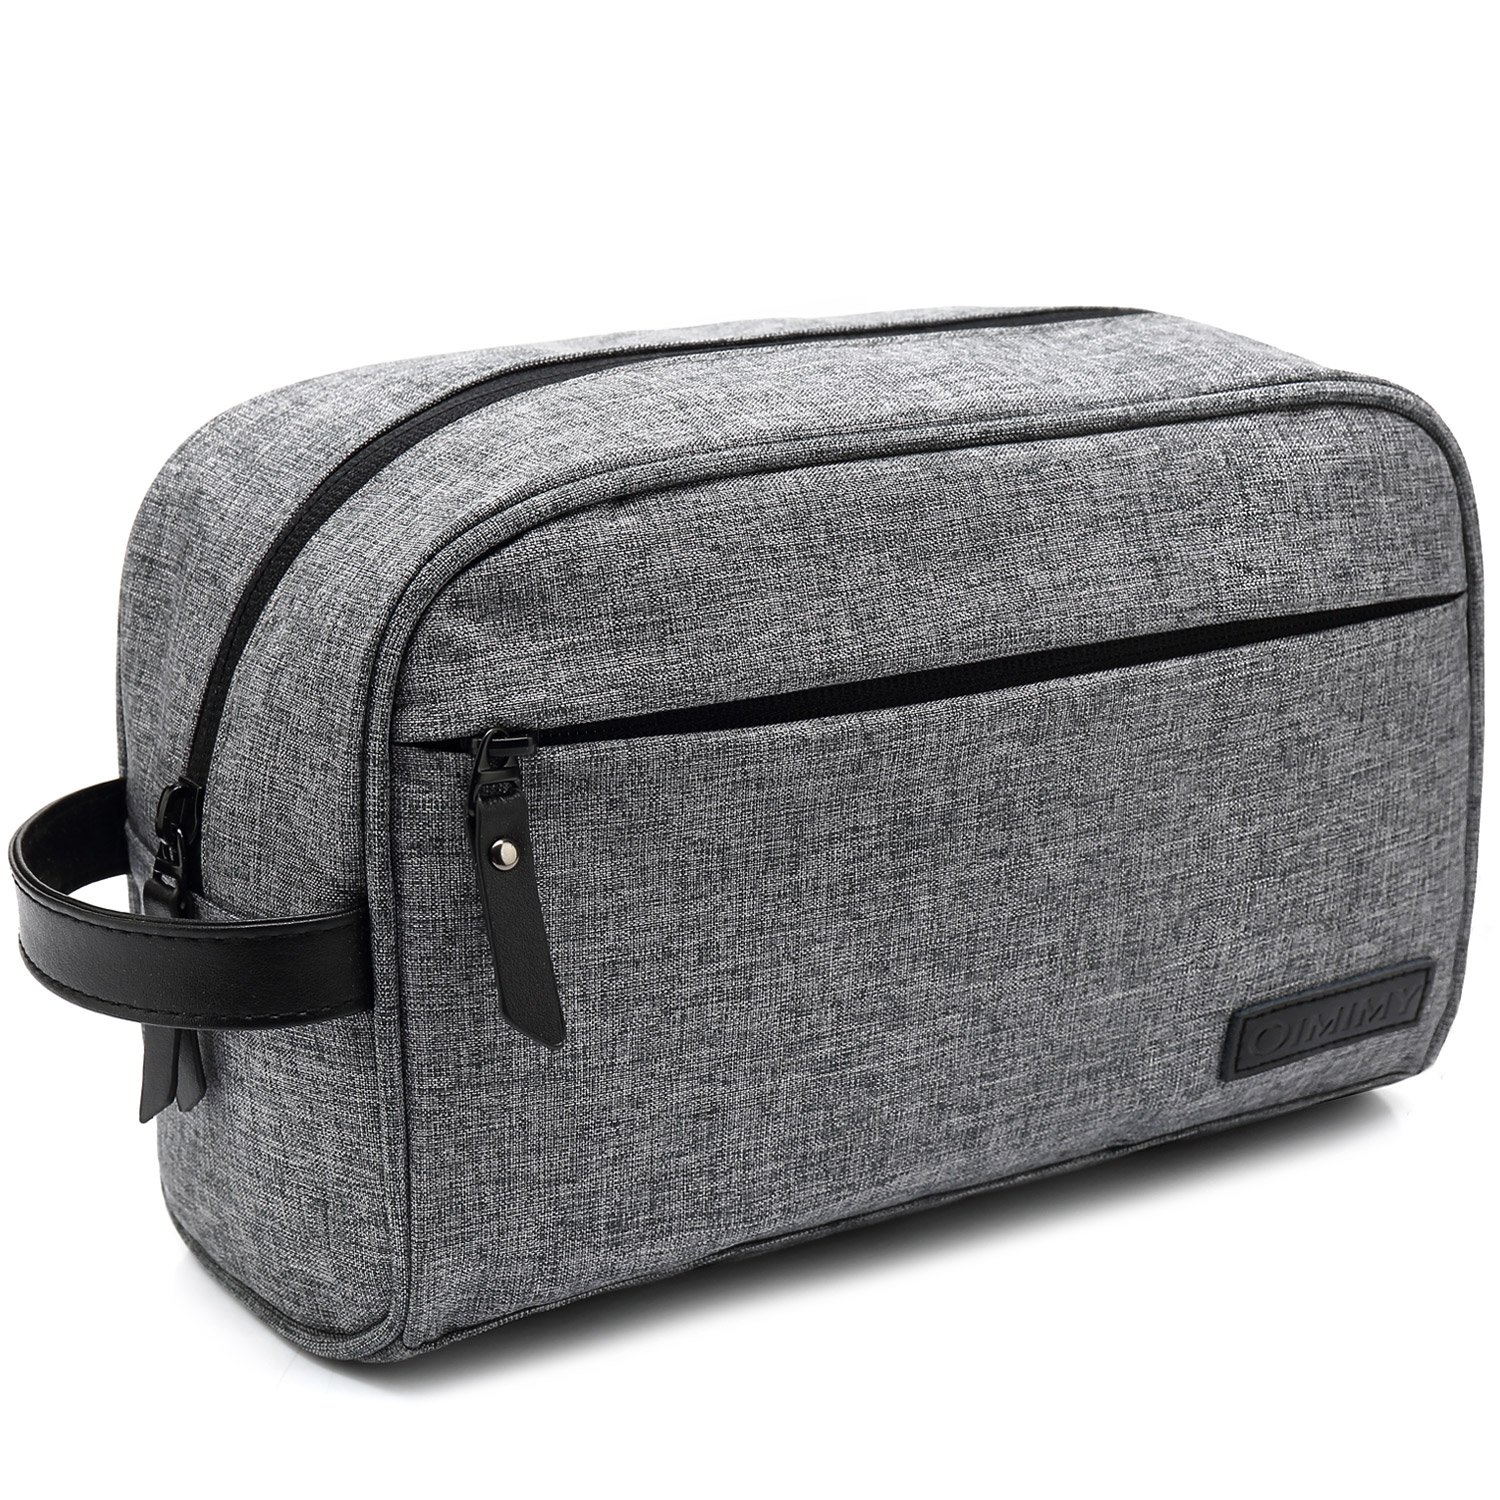 Best Mens Hanging Toiletry Wash Bags - Reviews 2022 - 2023 - Lightweight  Luggage Reviews